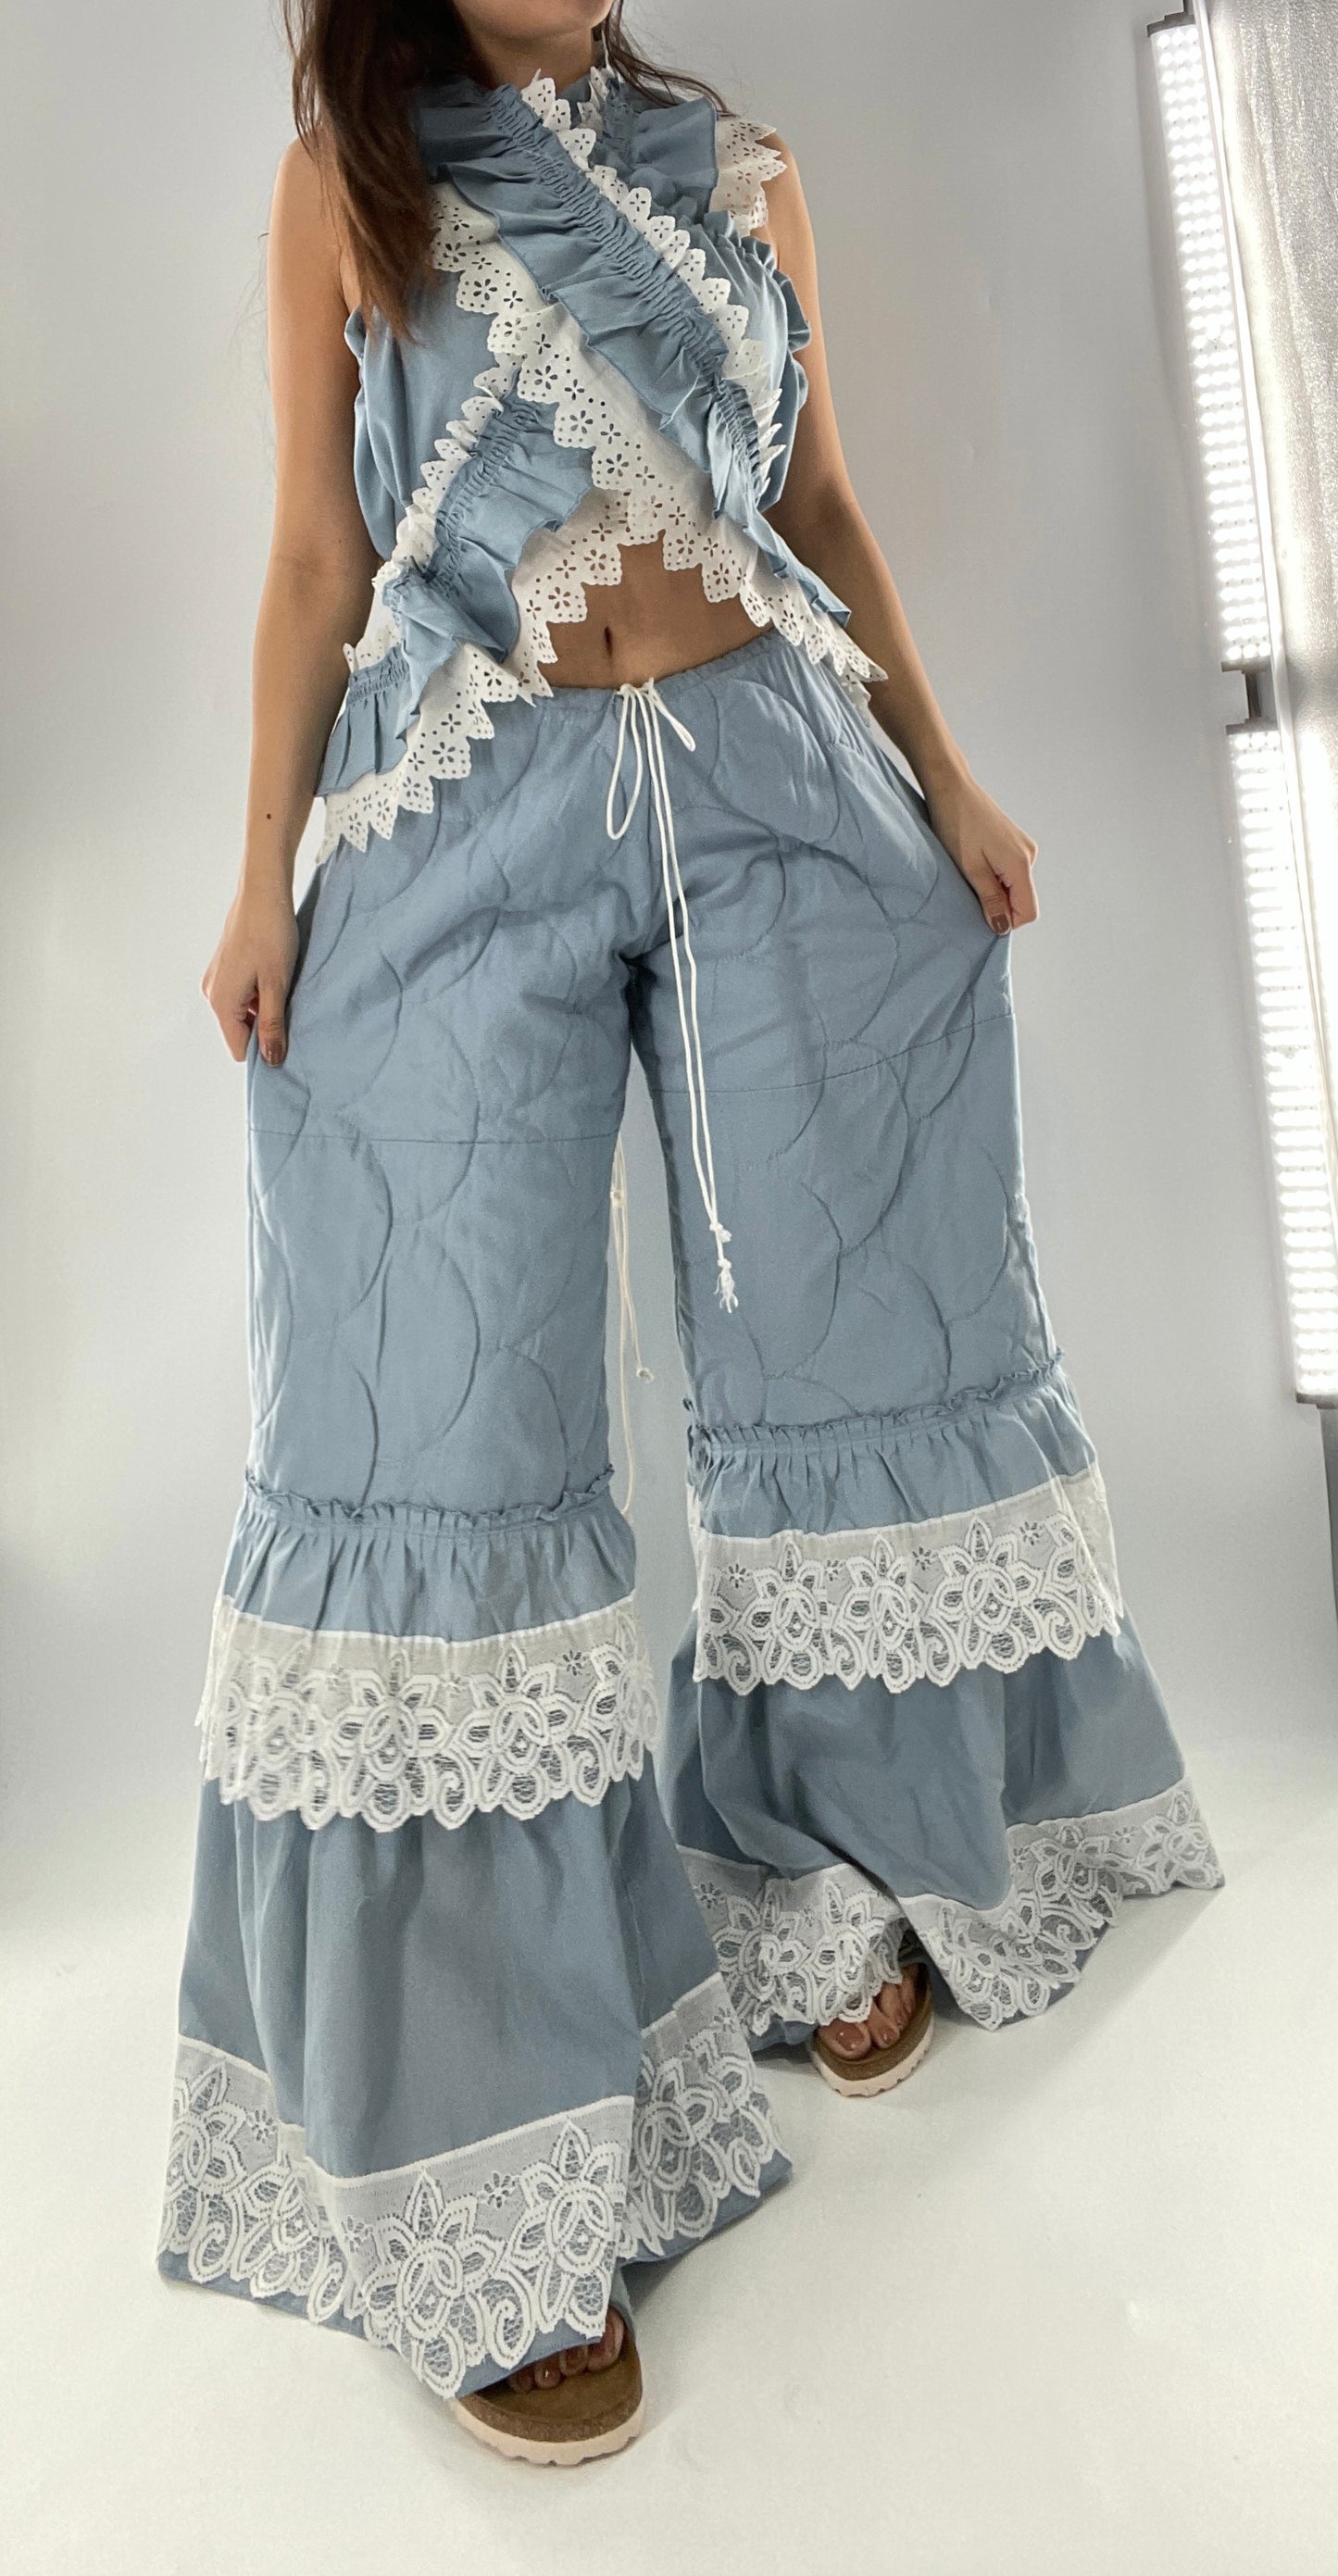 Vintage 2 Piece Powder Blue Set Featuring 2Way Blouse and Quilted Trousers Covered in Ruffles, Lace and Trim (One Size)